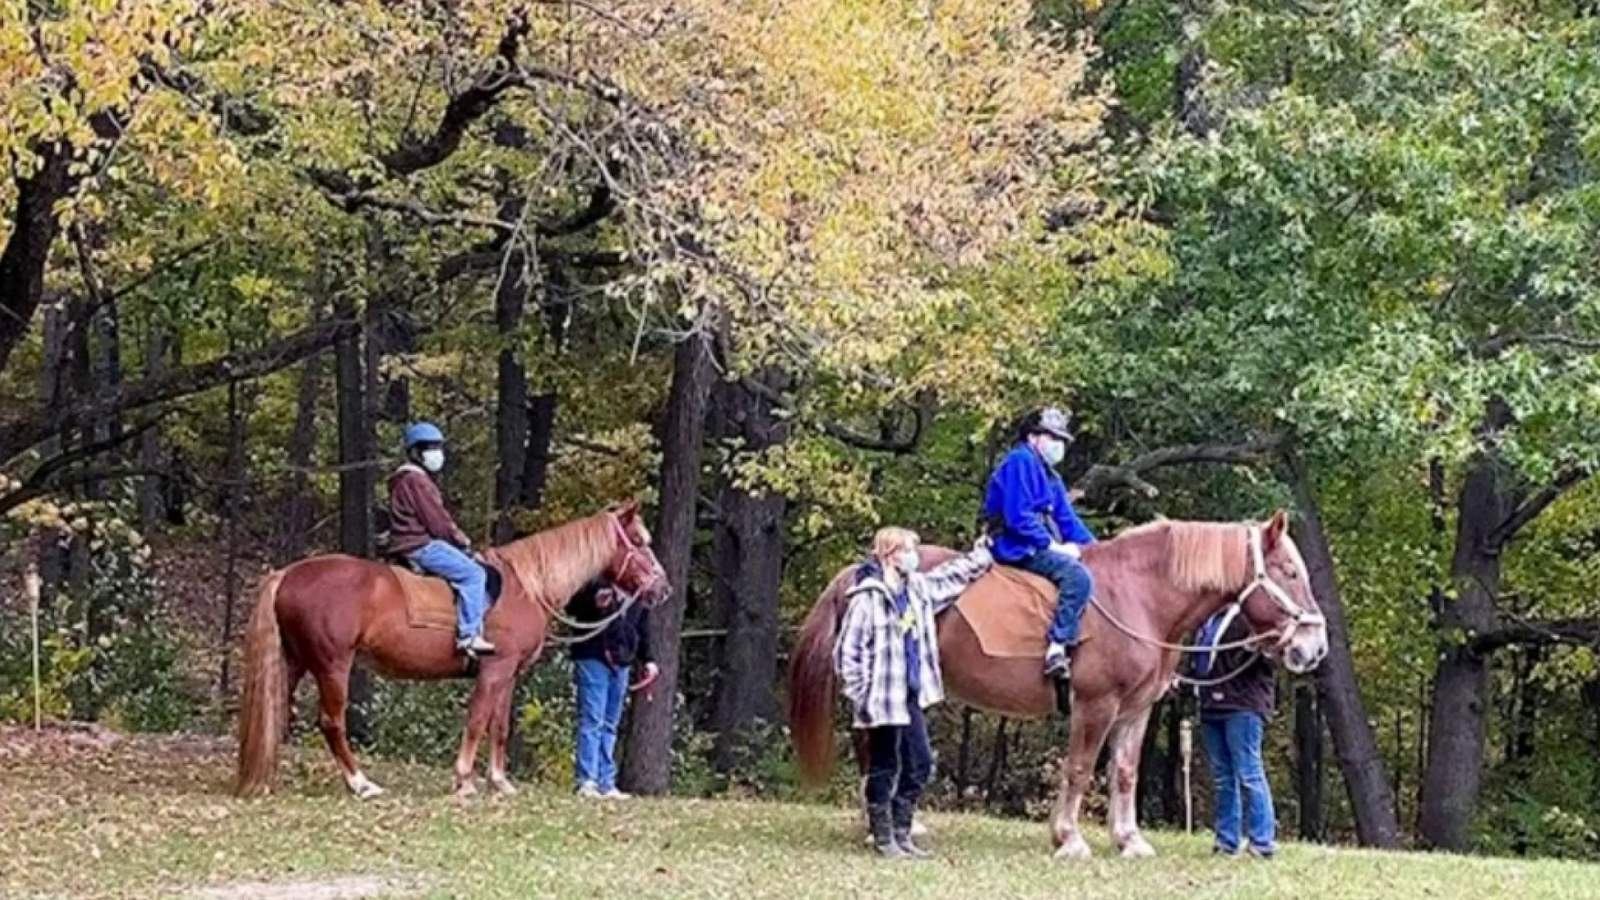 This local charity is helping special needs children and adults through horseback riding